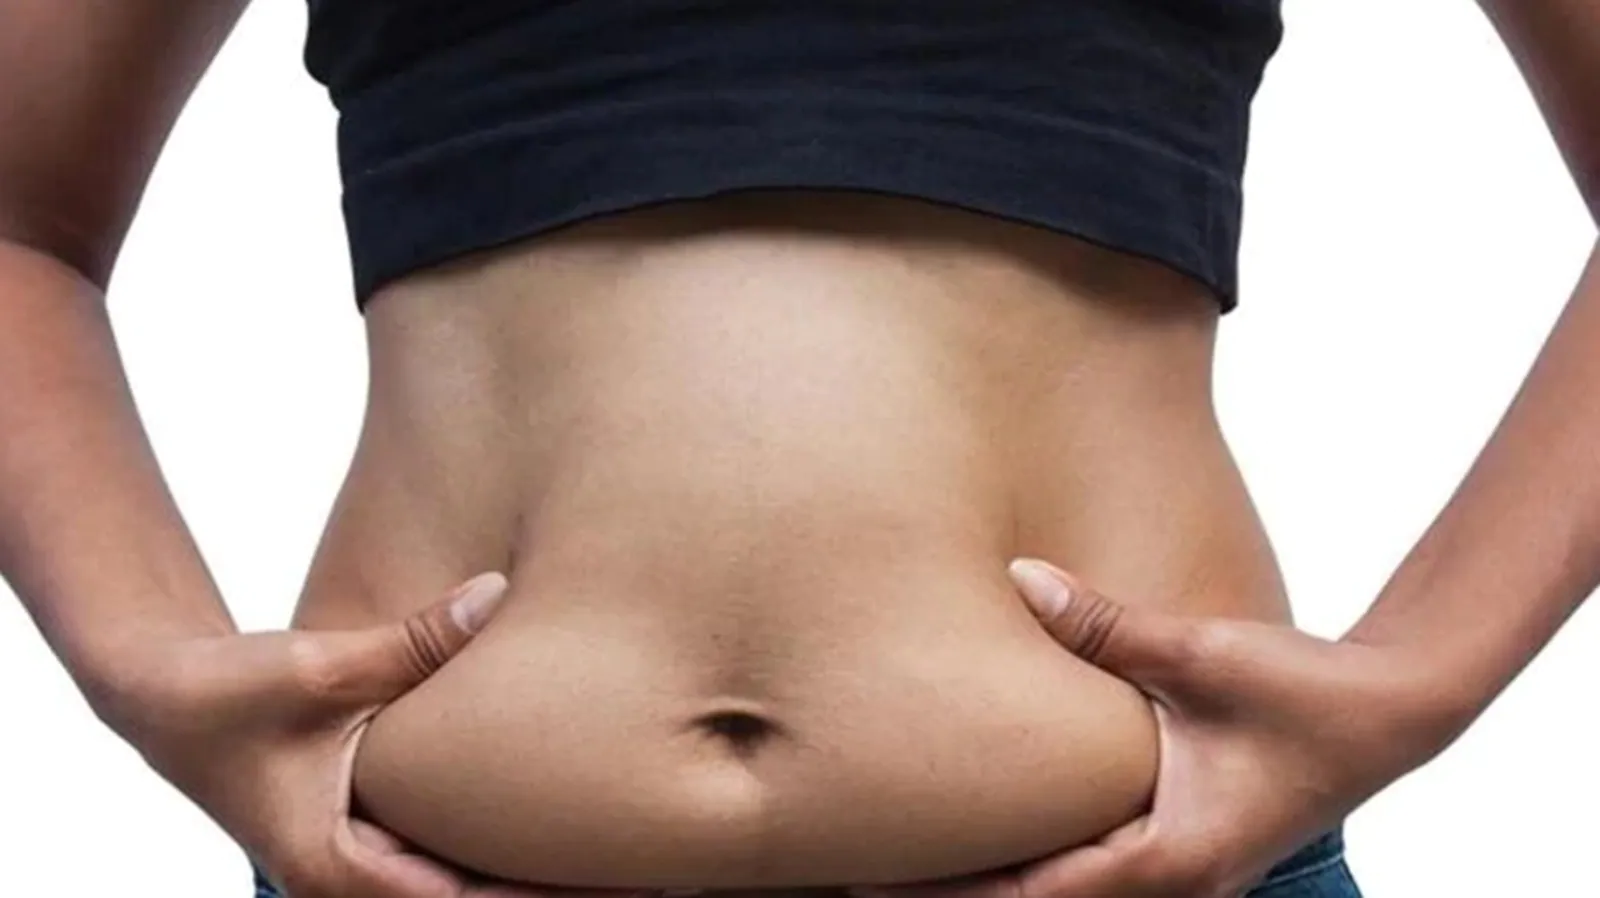 Follow these 6 golden rules to reduce belly fat